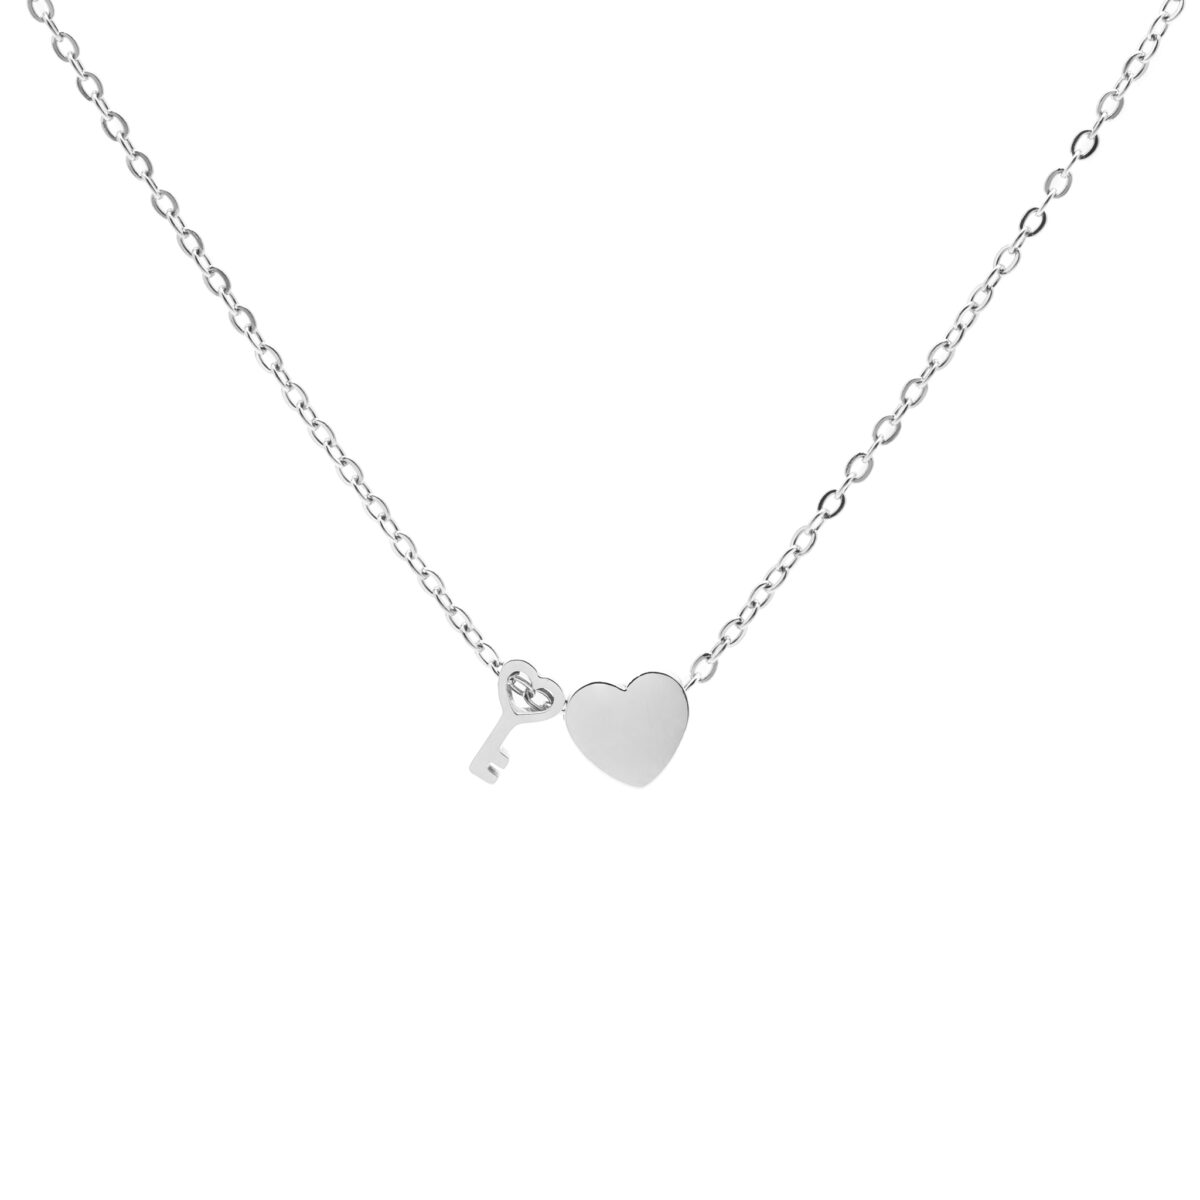 https://m.clubbella.co/product/key-to-thee-heart-silver-charm-necklace/ Key to Thee SIlver (2)